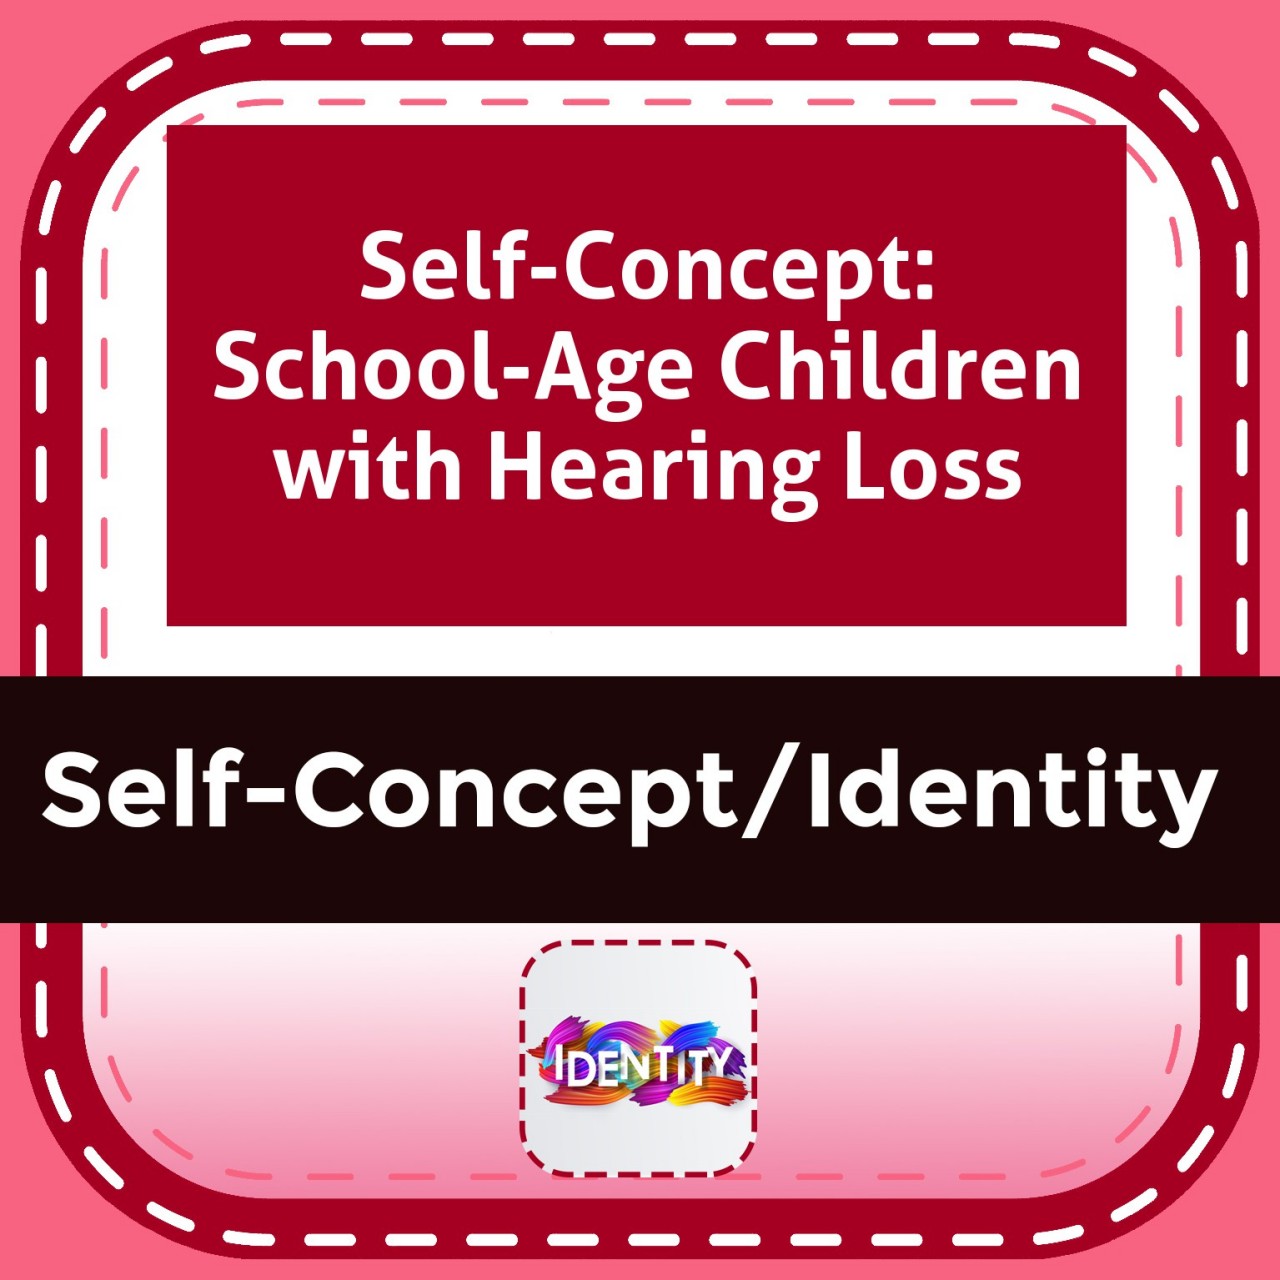 Self-Concept: School-Age Children with Hearing Loss